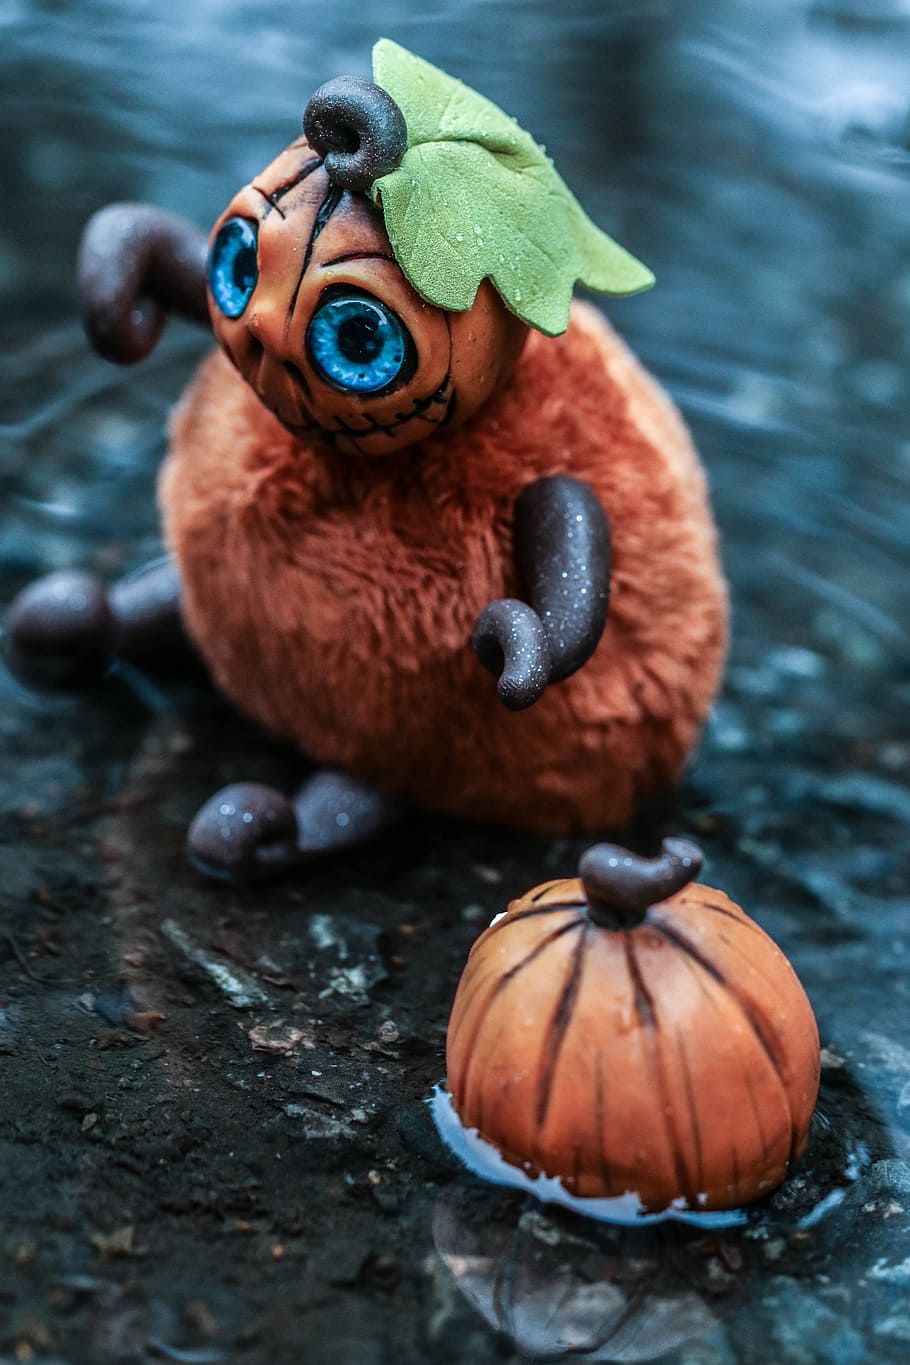 toy, figure, pumpkin, autumn, small, puddle, rain, close-up, food and drink, focus on foreground